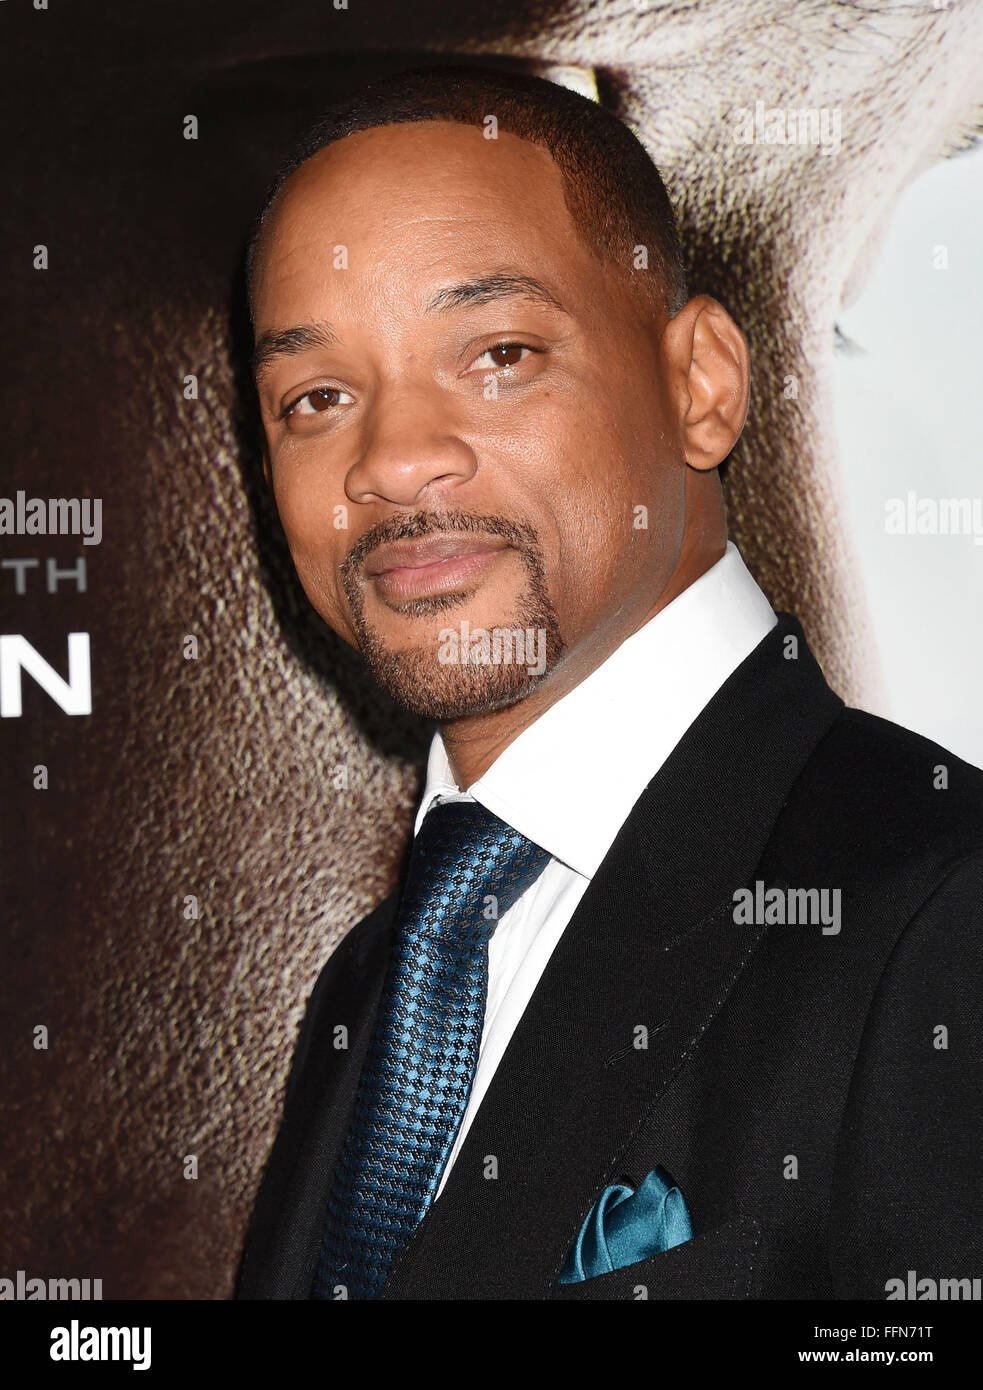 Actor Will Smith attends the screening of Columbia Pictures' 'Concussion' at the Regency Village Theater on November 23, 2015 in Westwood, California., Stock Photo